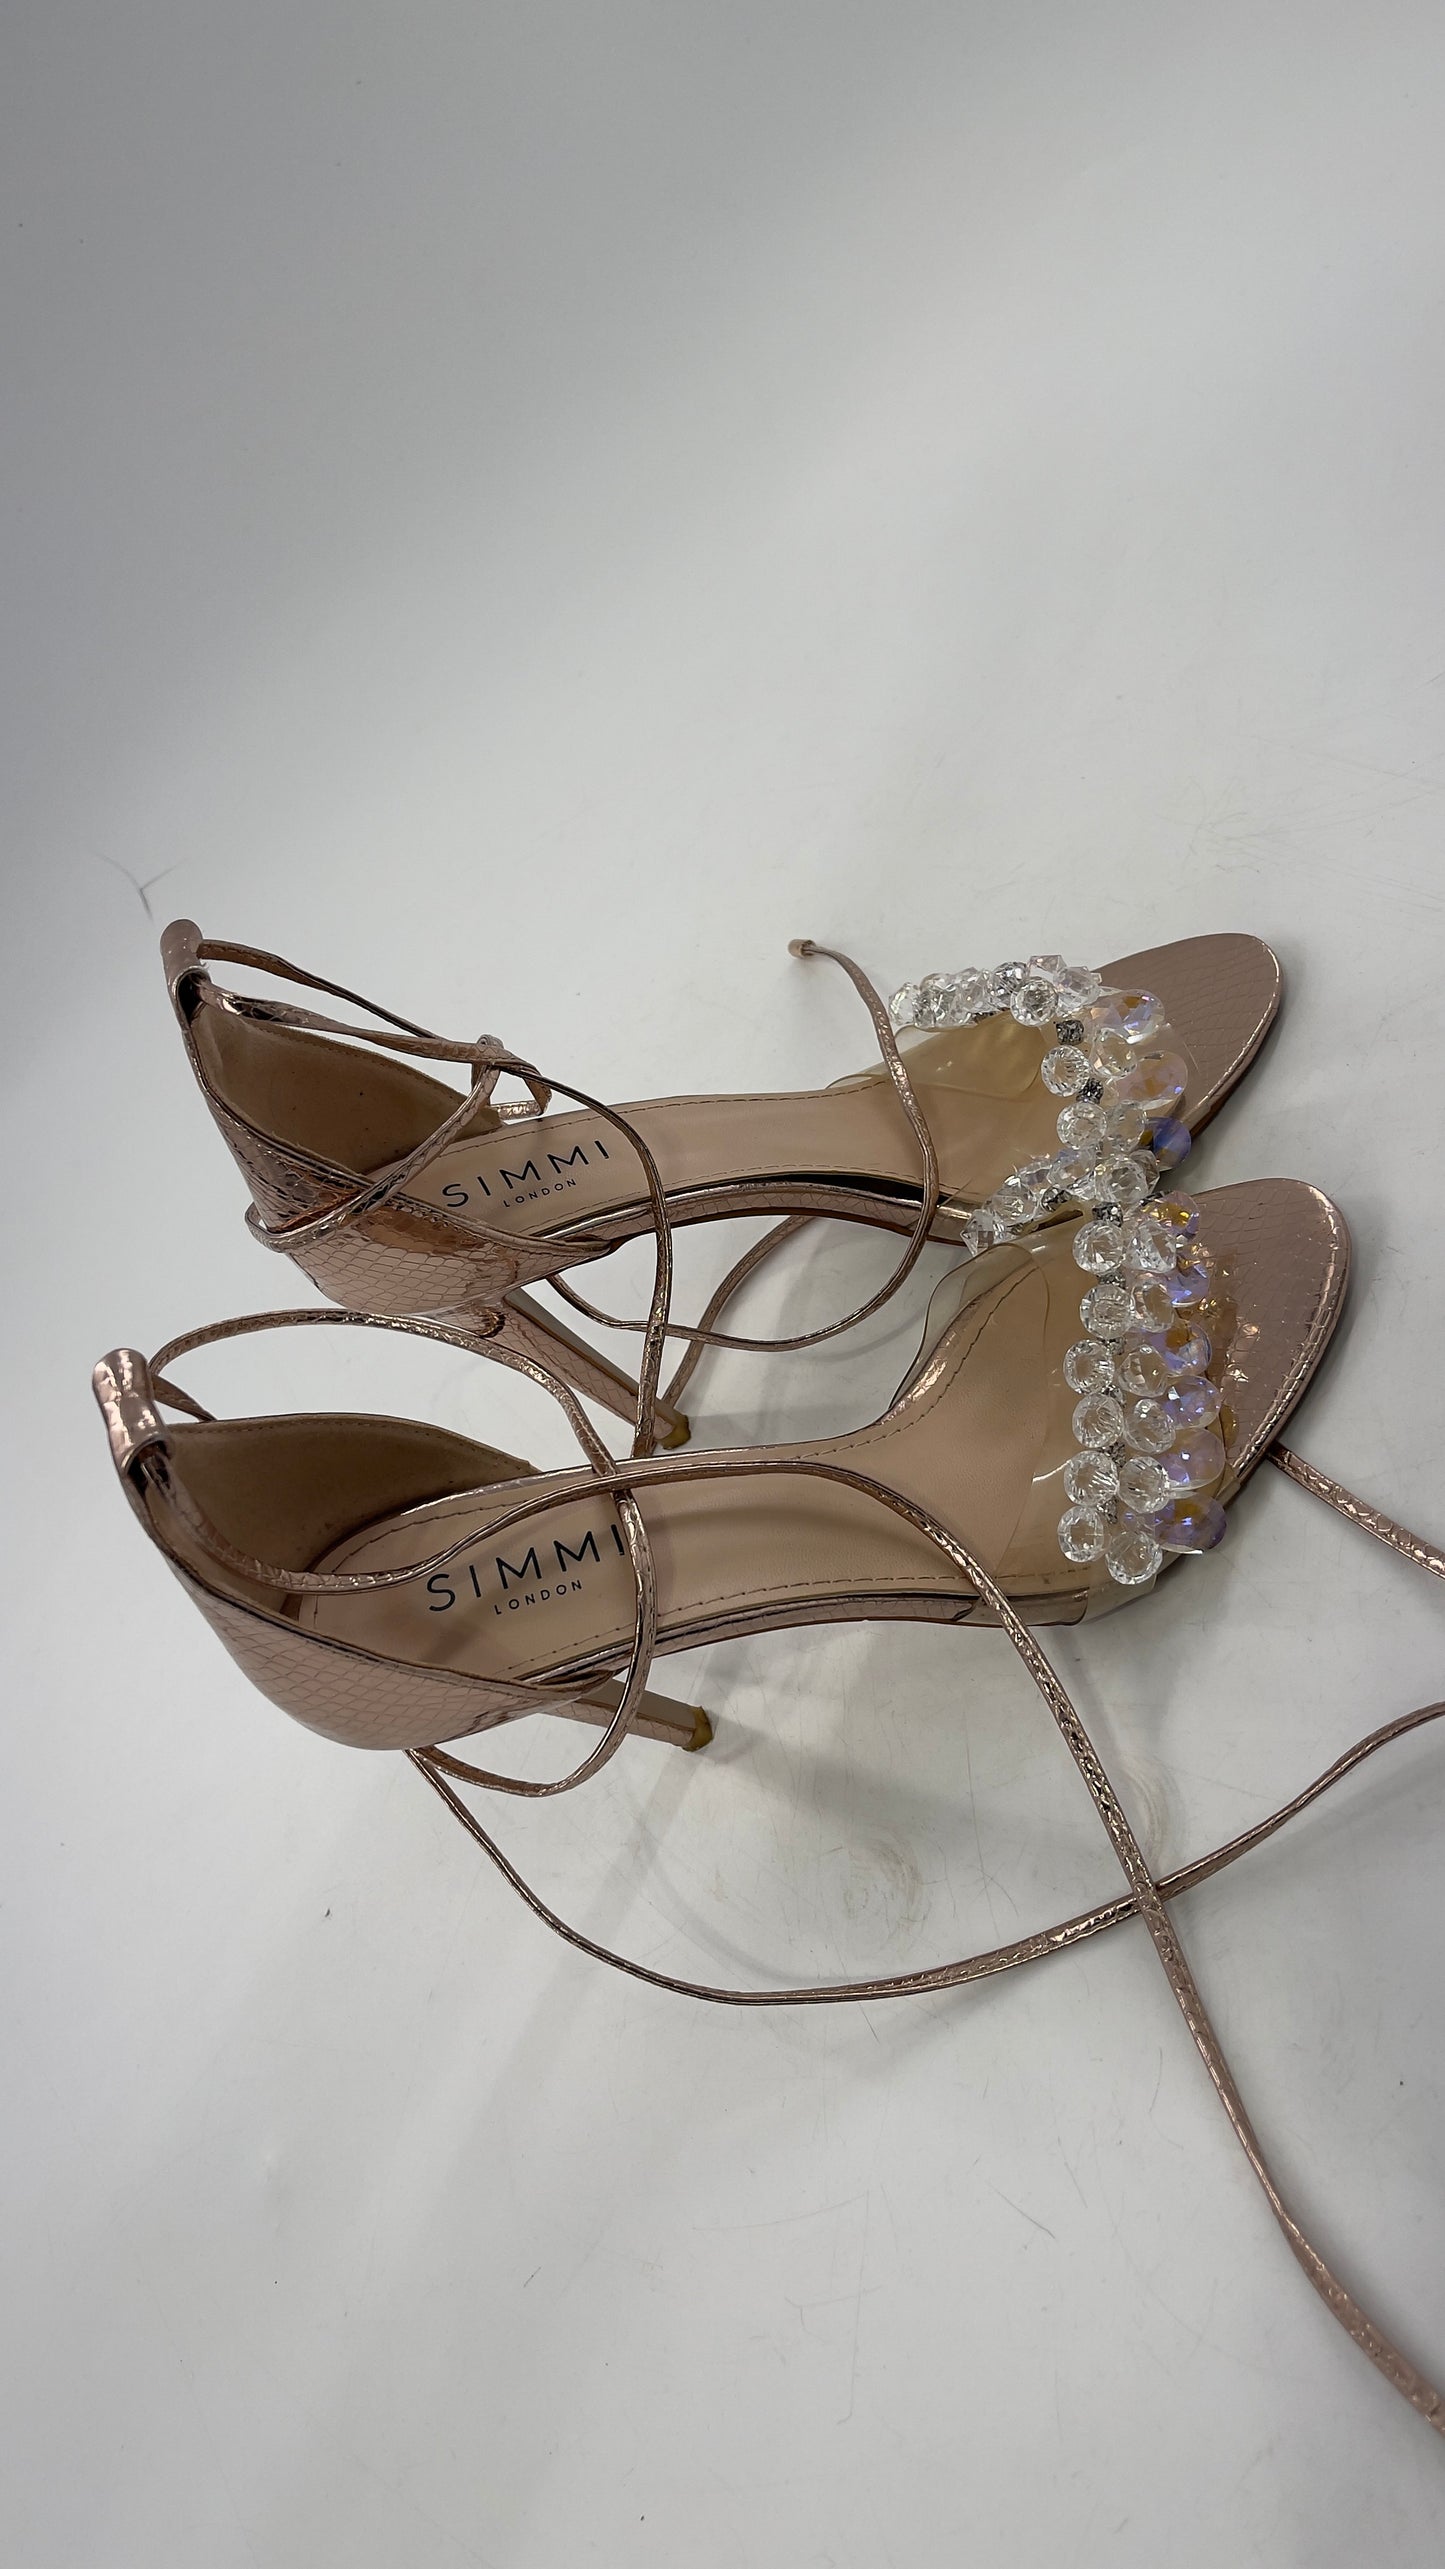 SIMMI LONDON Rose Gold Textured Heels with Clear Toe Strap Covered in Rhinestones/ Crystal Pendants and Tie Up Ankle Straps (7)